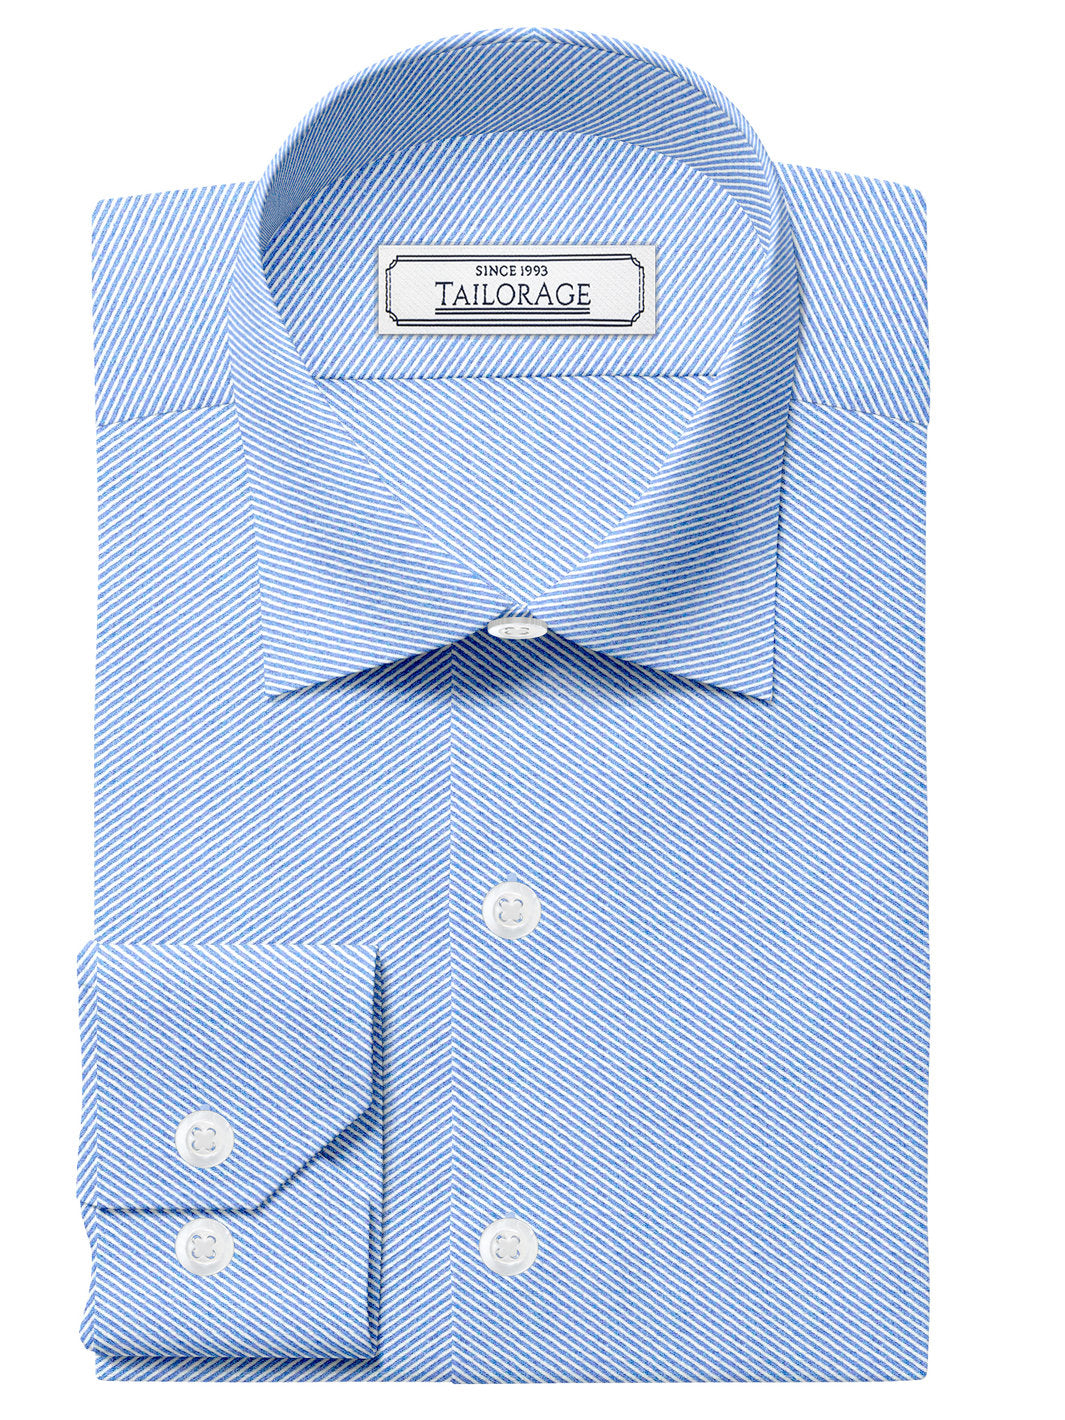 Delicate Blue Dobby Twill - CUS-10026